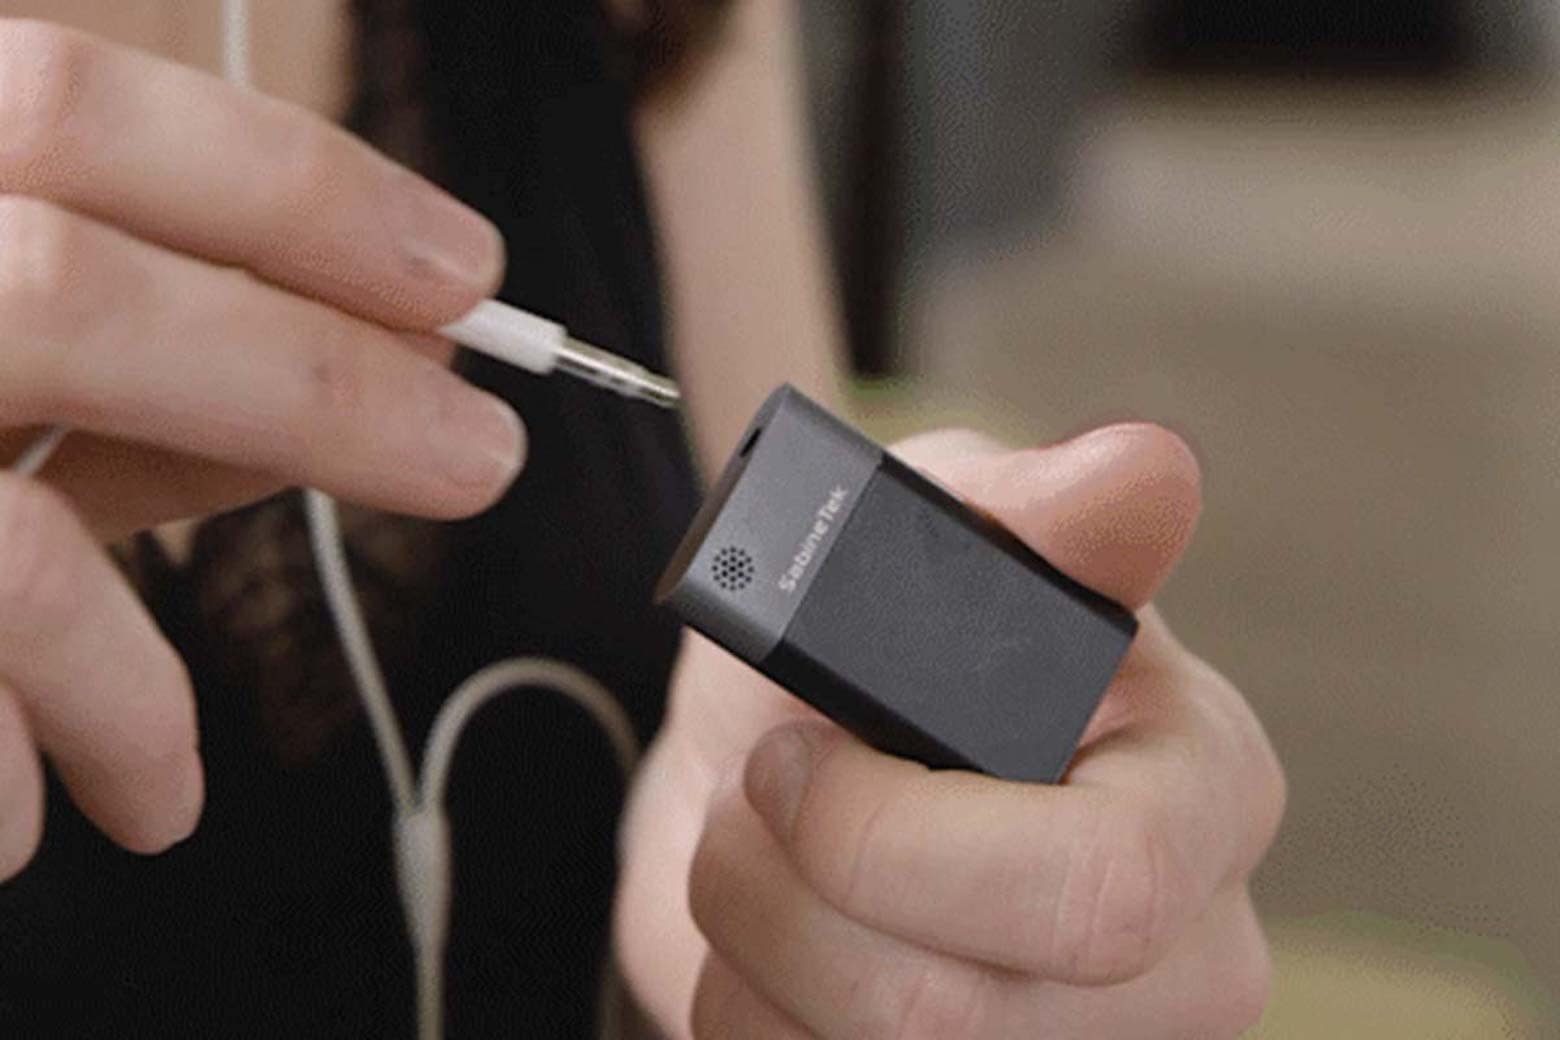 AudioWow wireless audio studio fits in pocket, costs just 9